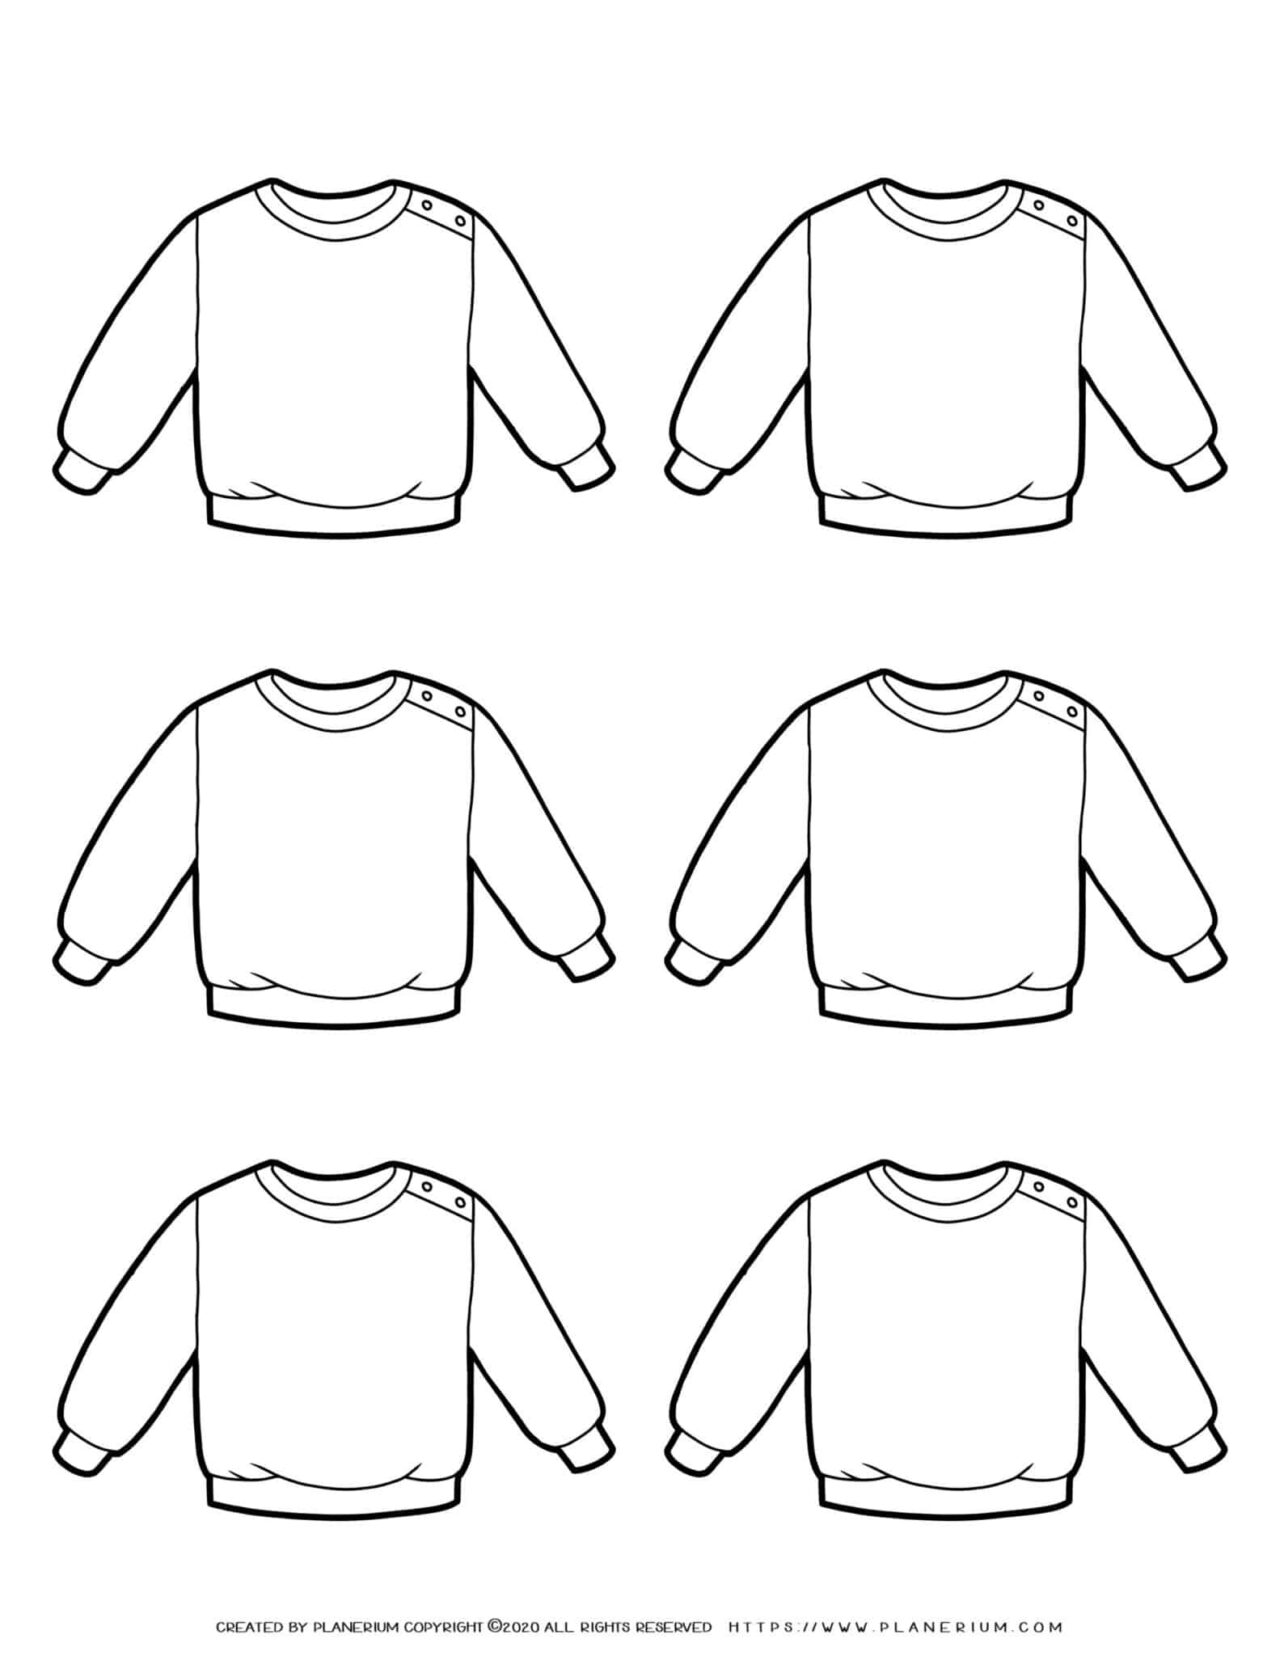 Clothes Template - Six Sweaters | Planerium